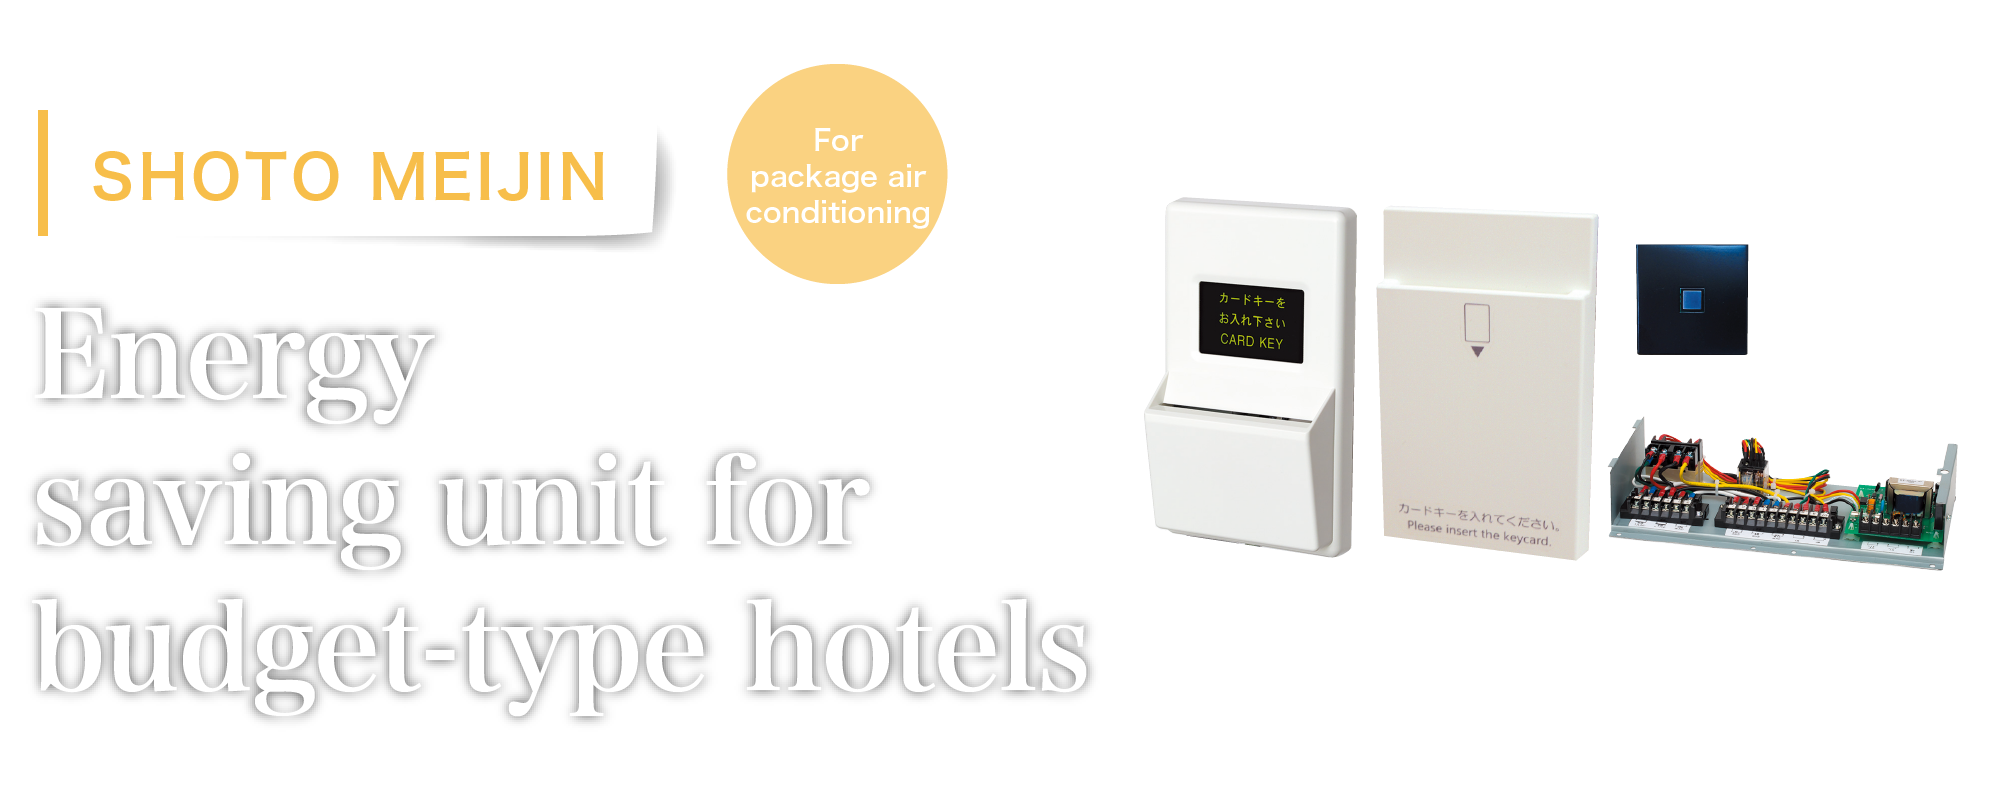 Energy saving unit for budget-type hotels